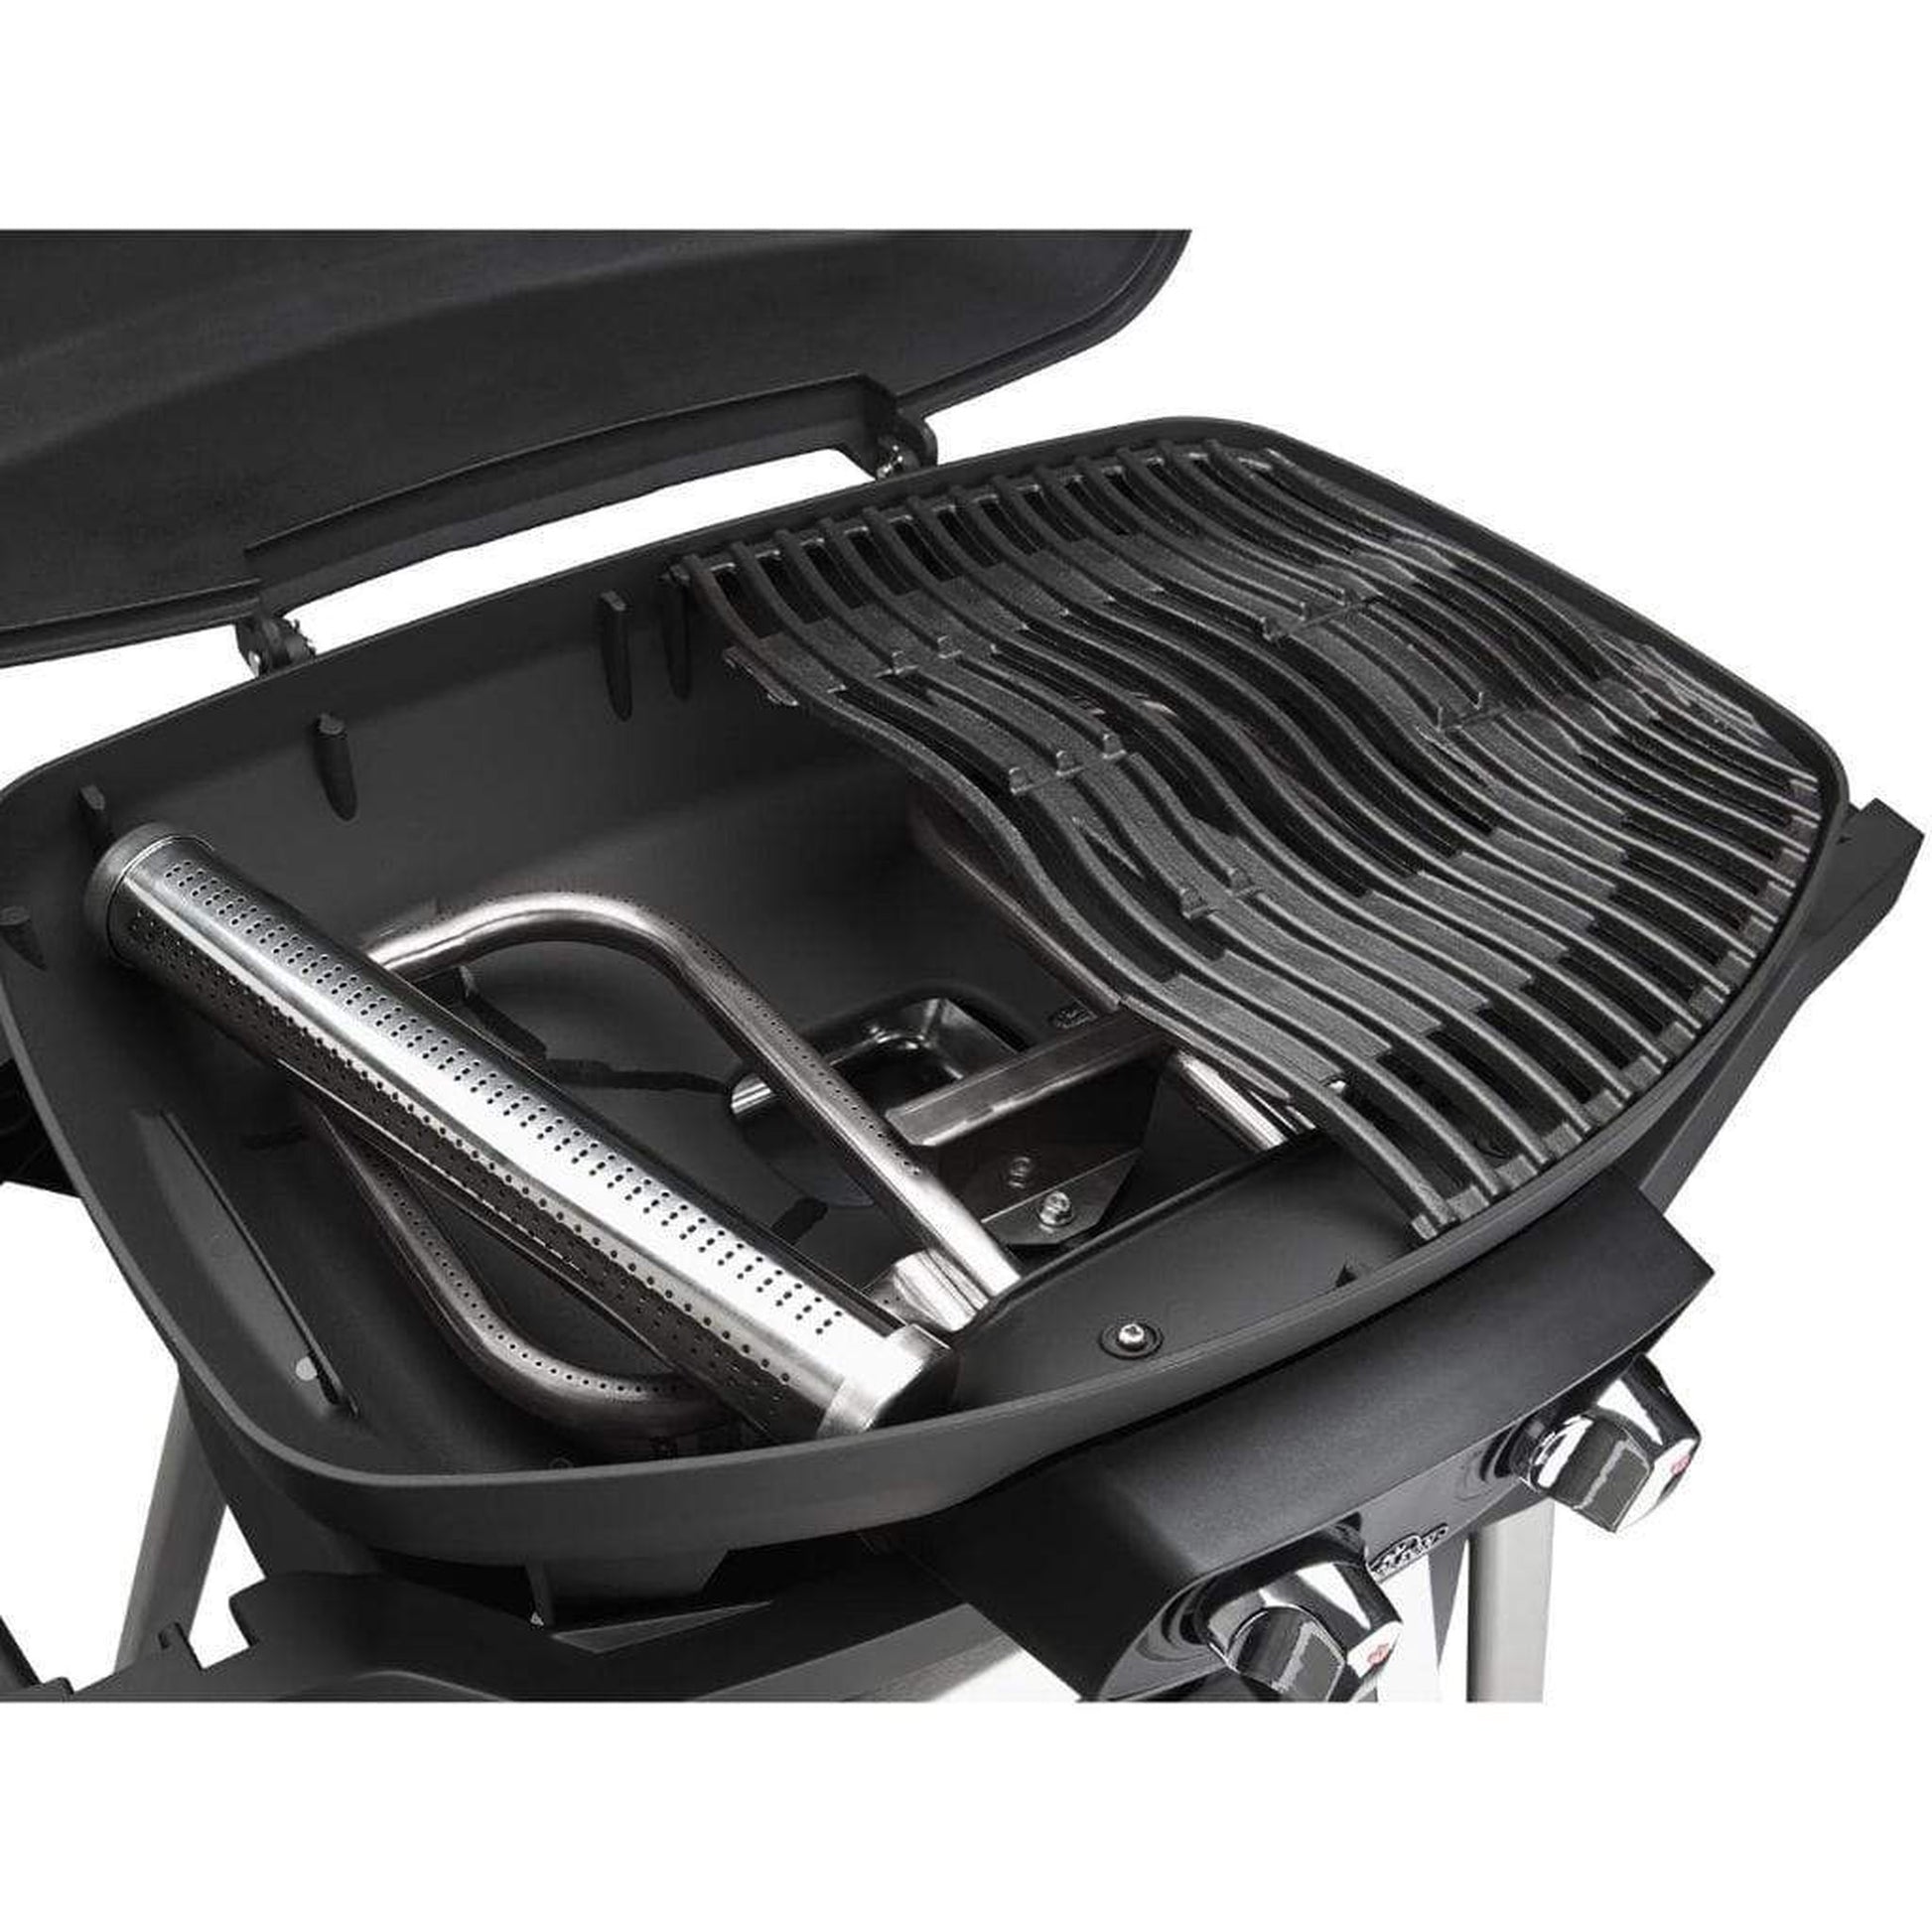 HAPPYGRILL 1600W Electric Grill Outdoor BBQ Grill with Warming Rack for  15-Serving Barbecue Grill Portable Stand BBQ Grill